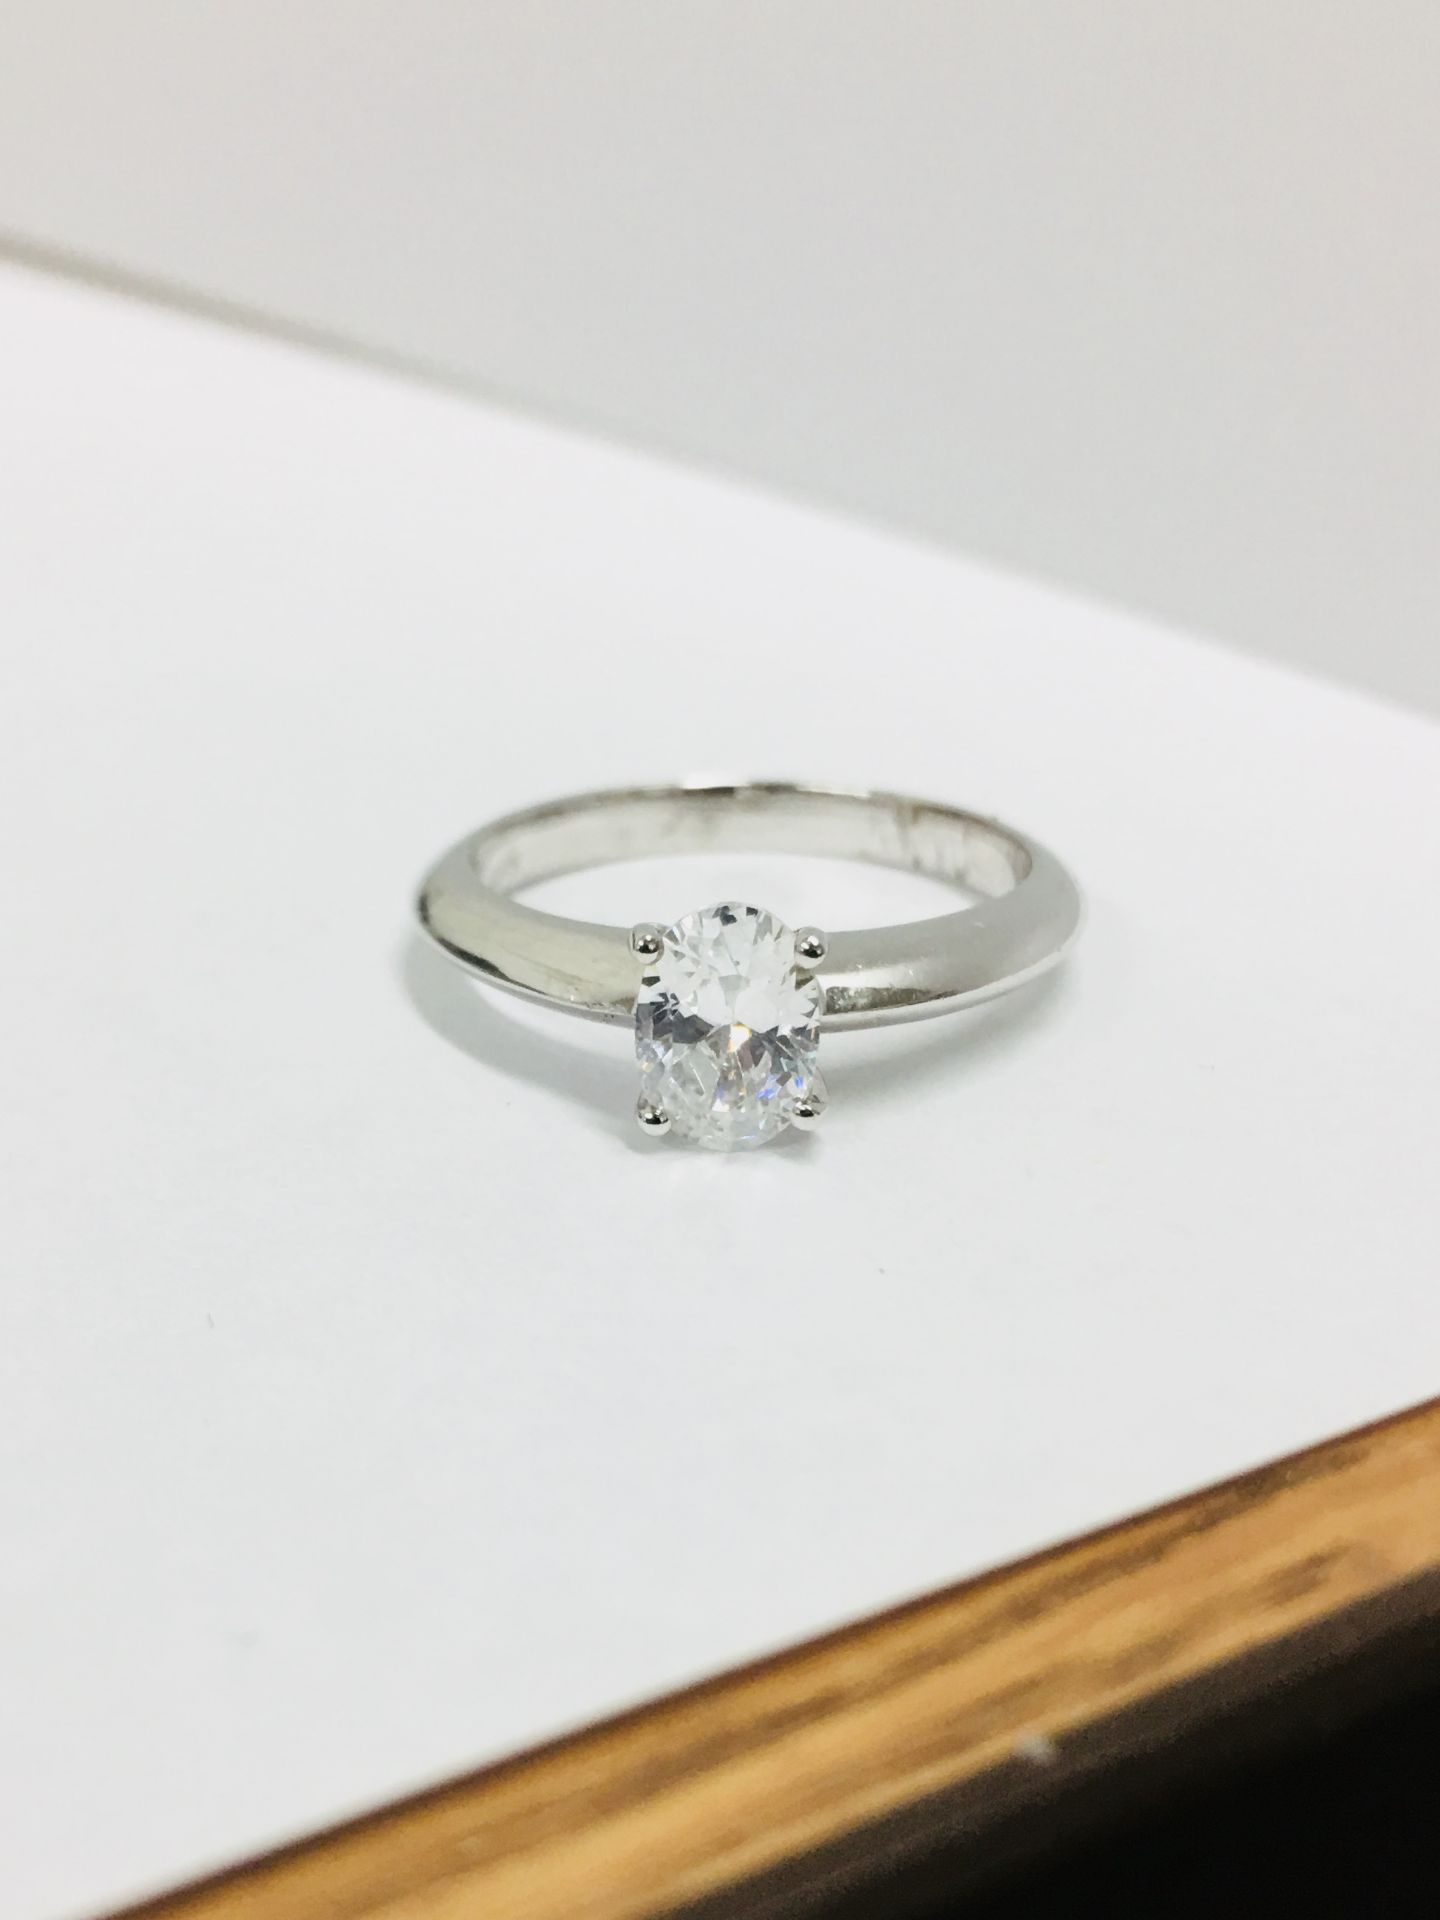 Platinum oval diamond solitaire ring.0.30ct oval diamond si clarity i colour,2.9gms platinum setting - Image 4 of 5